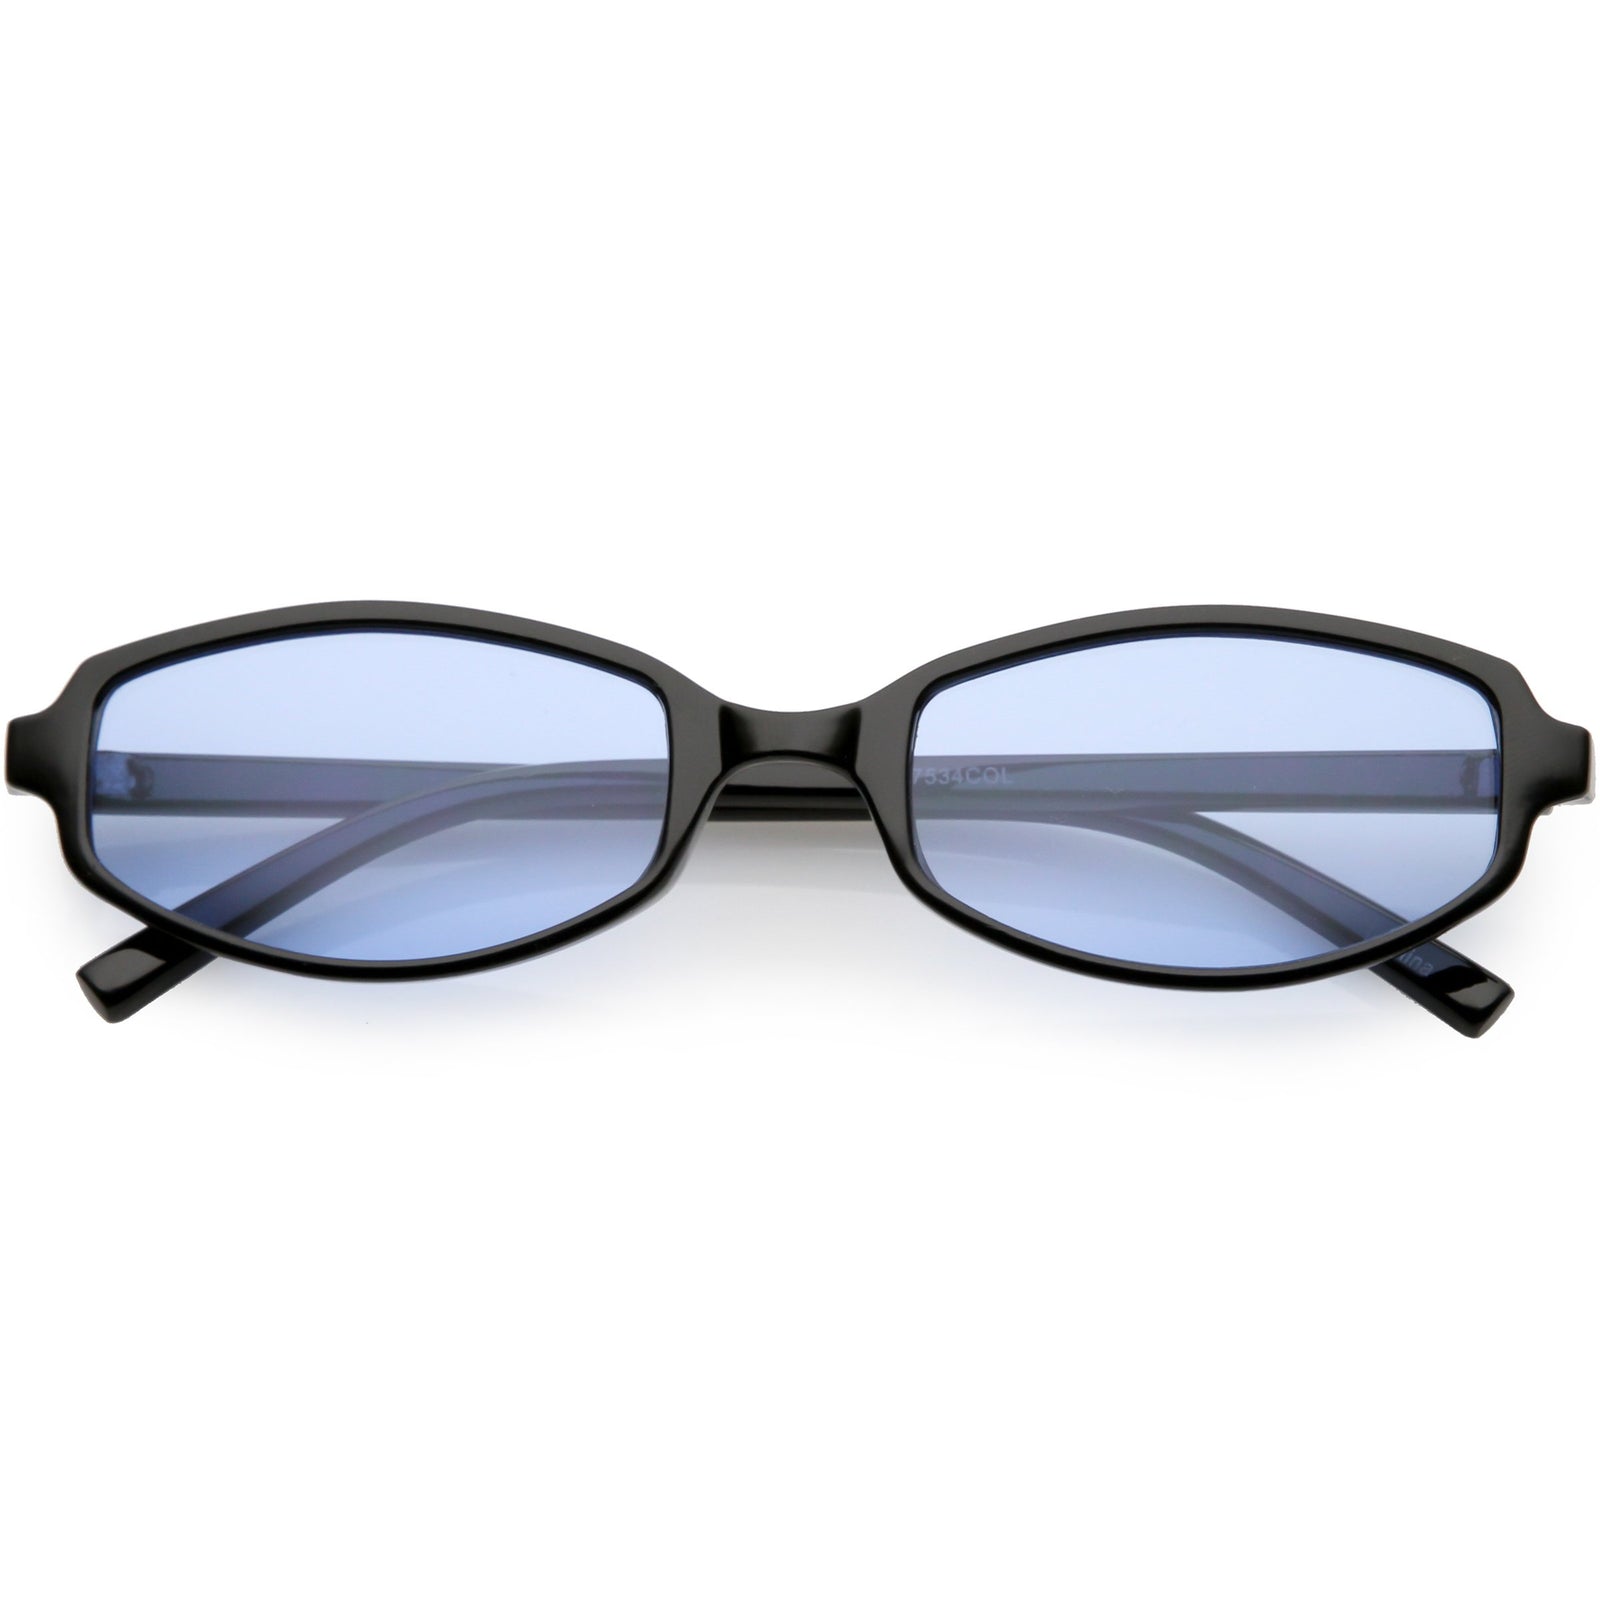 The Nineties 90s Sunglasses At Zerouv® 